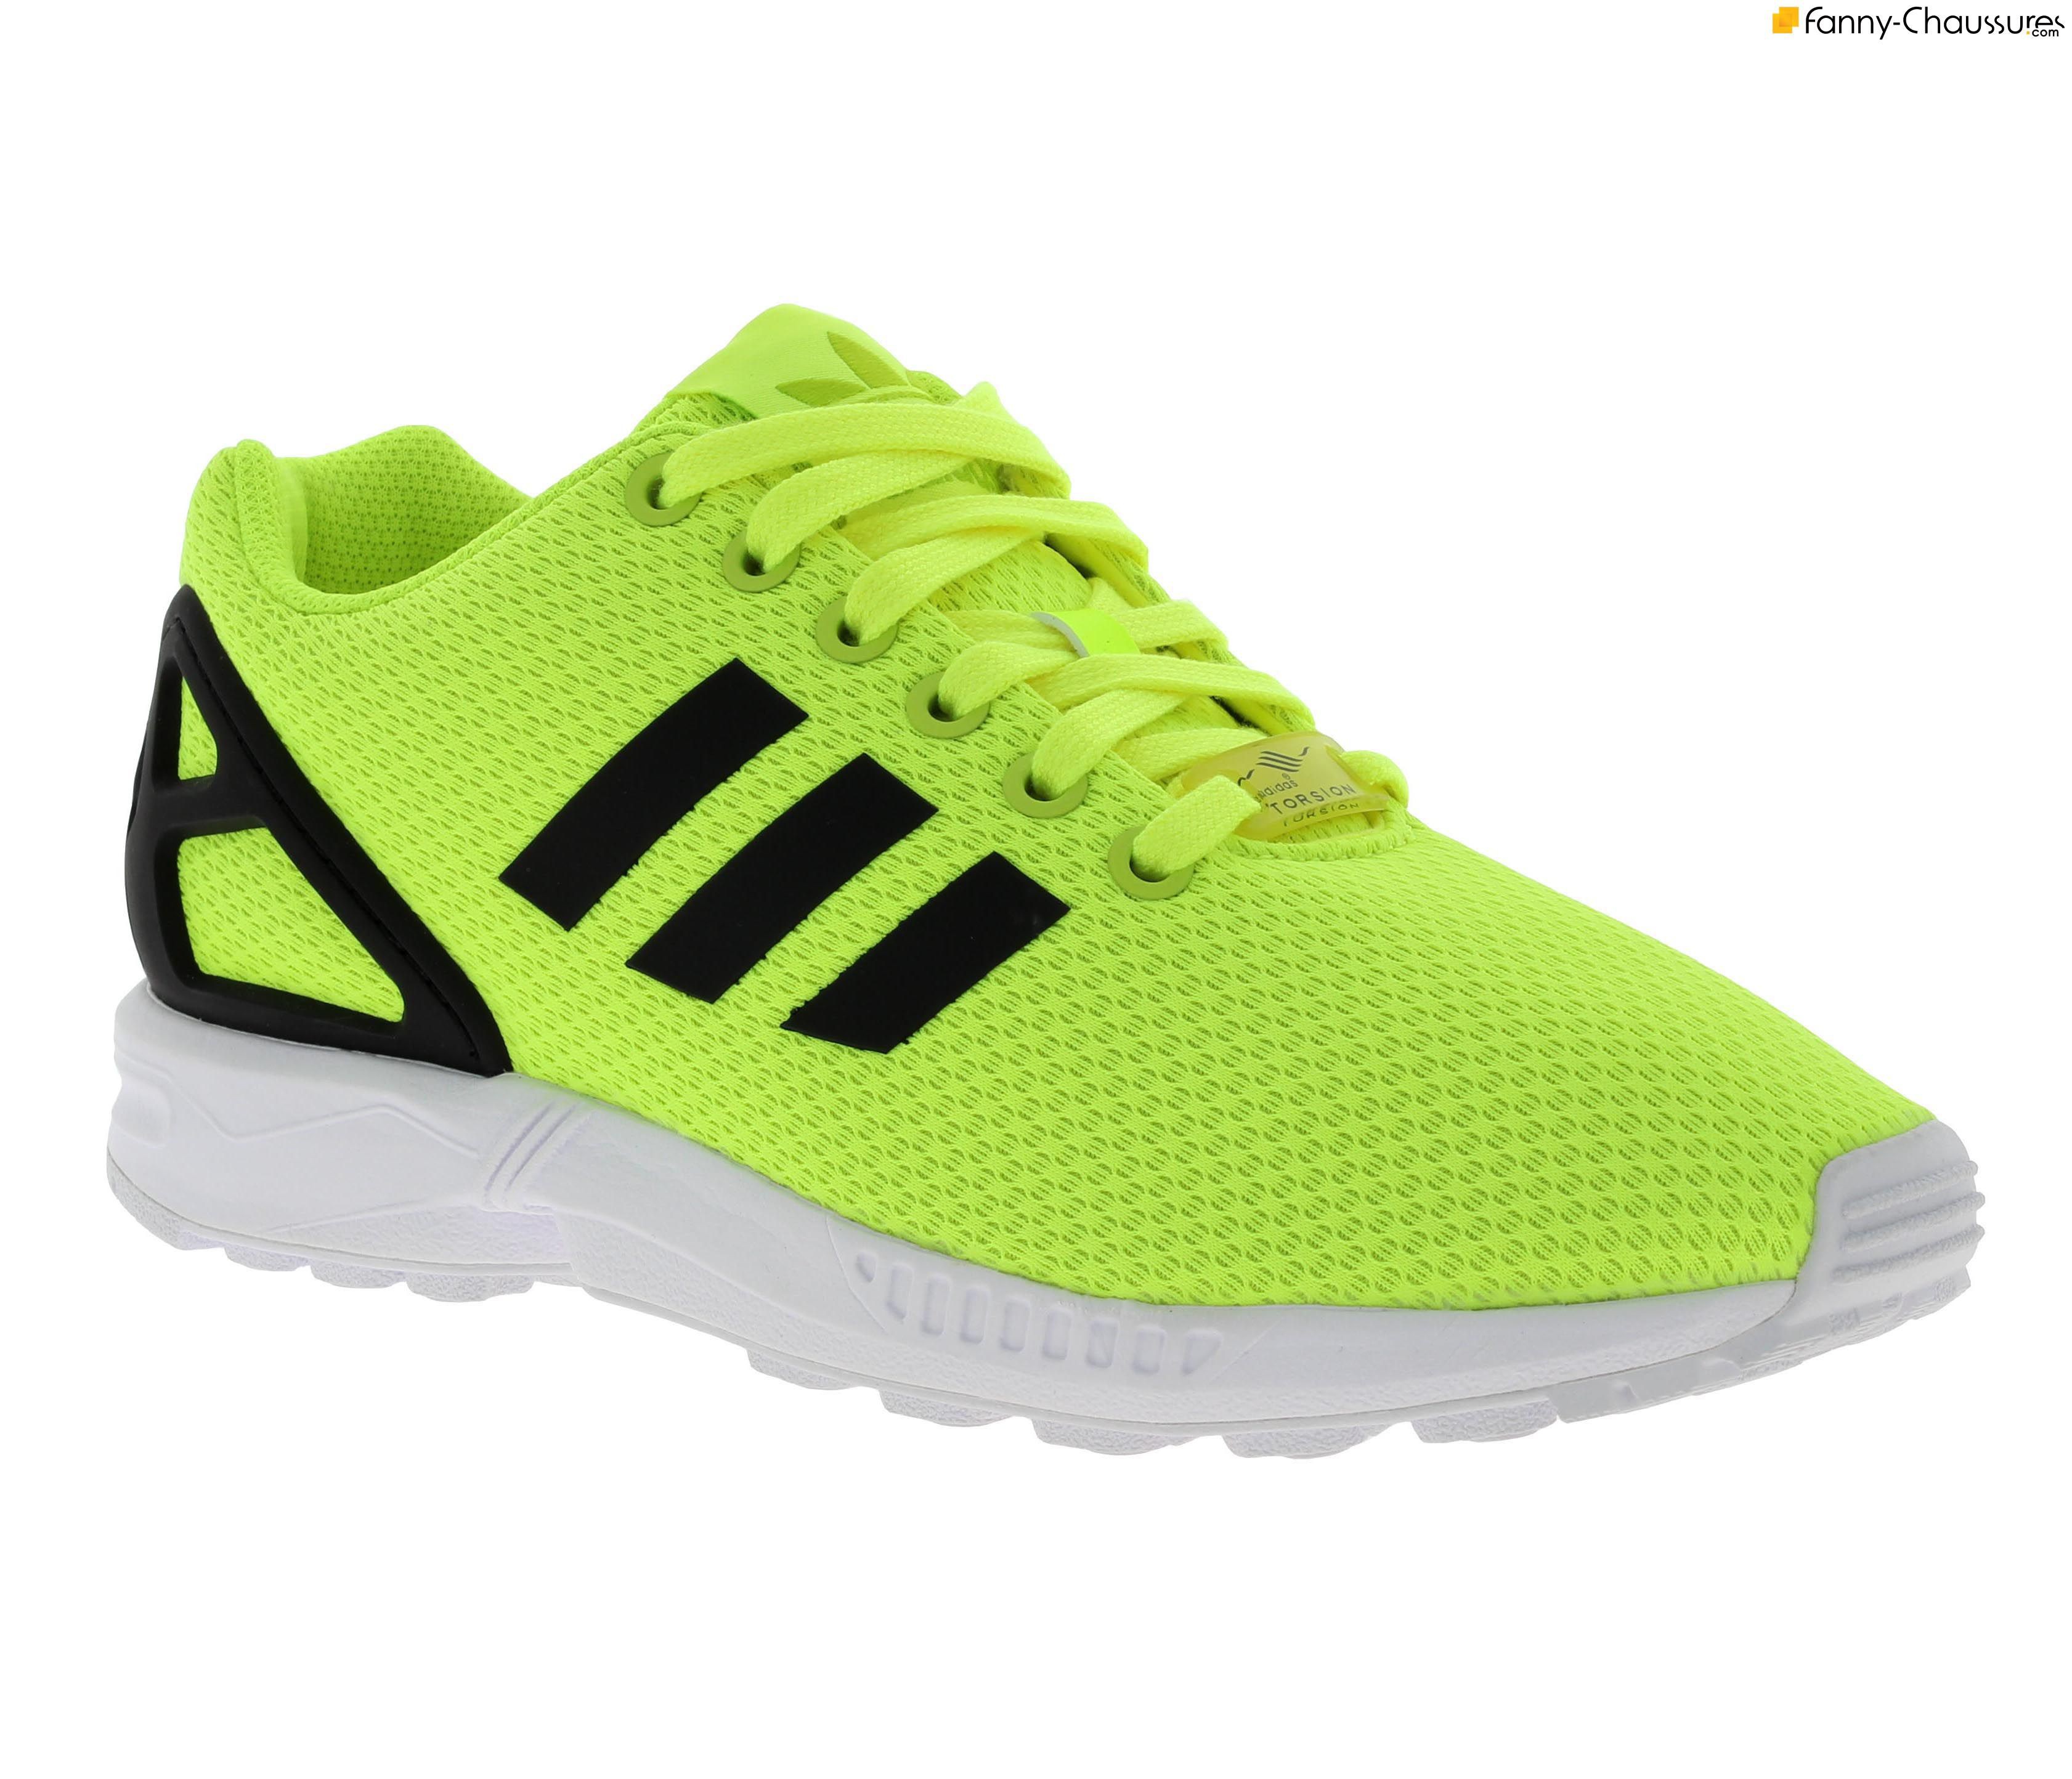 adidas zx 650 2015 homme